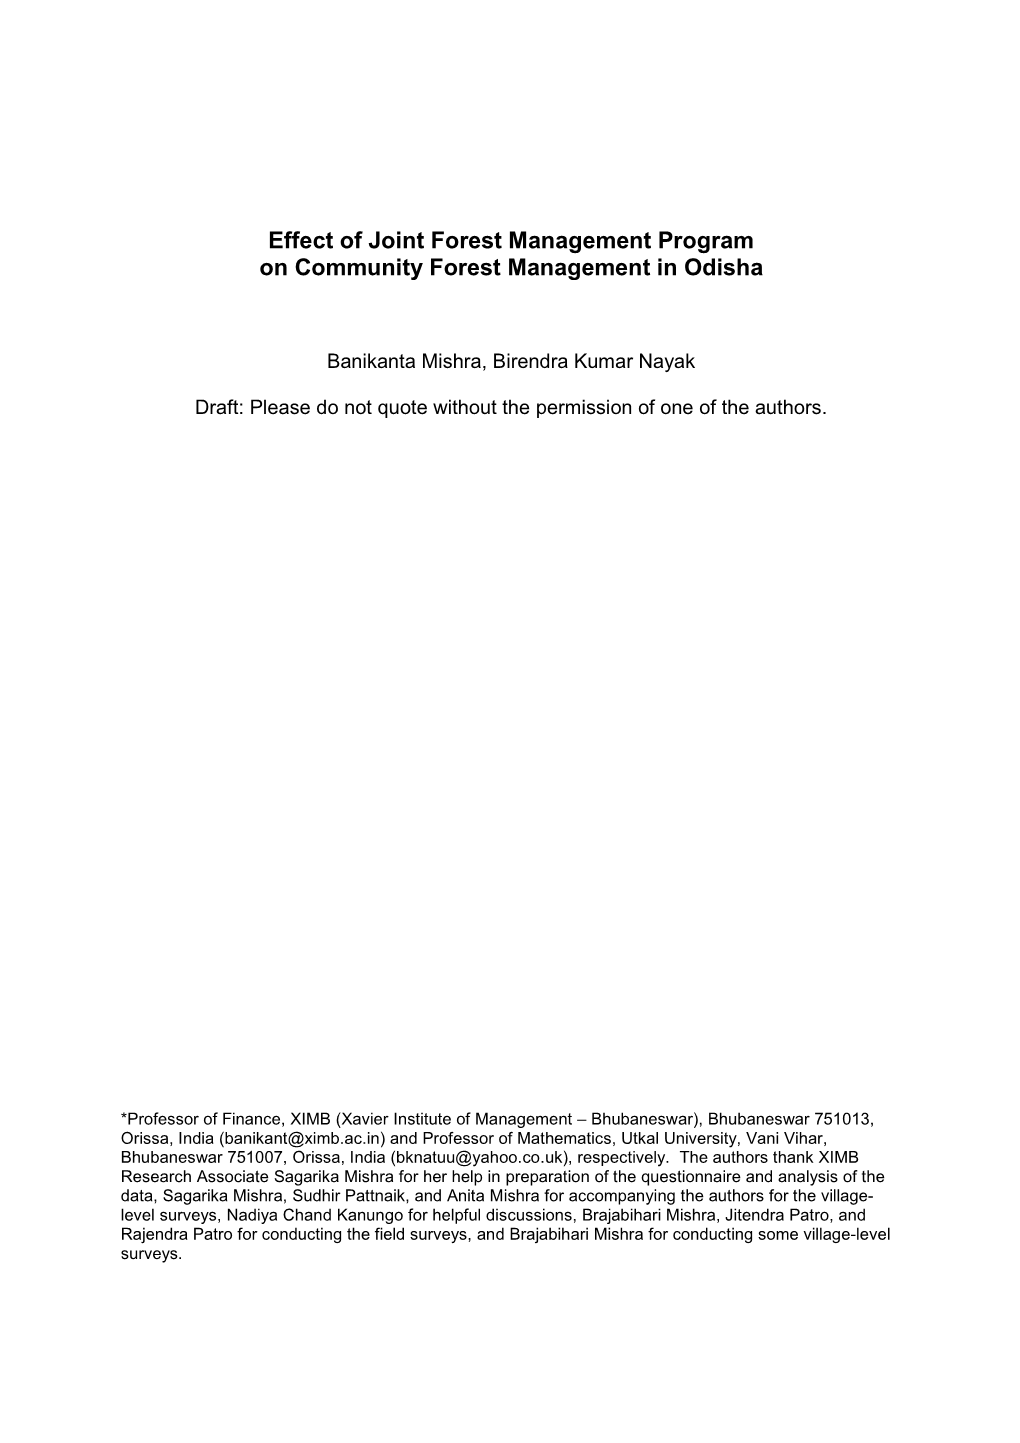 Effect of Joint Forest Management Program on Community Forest Management in Odisha